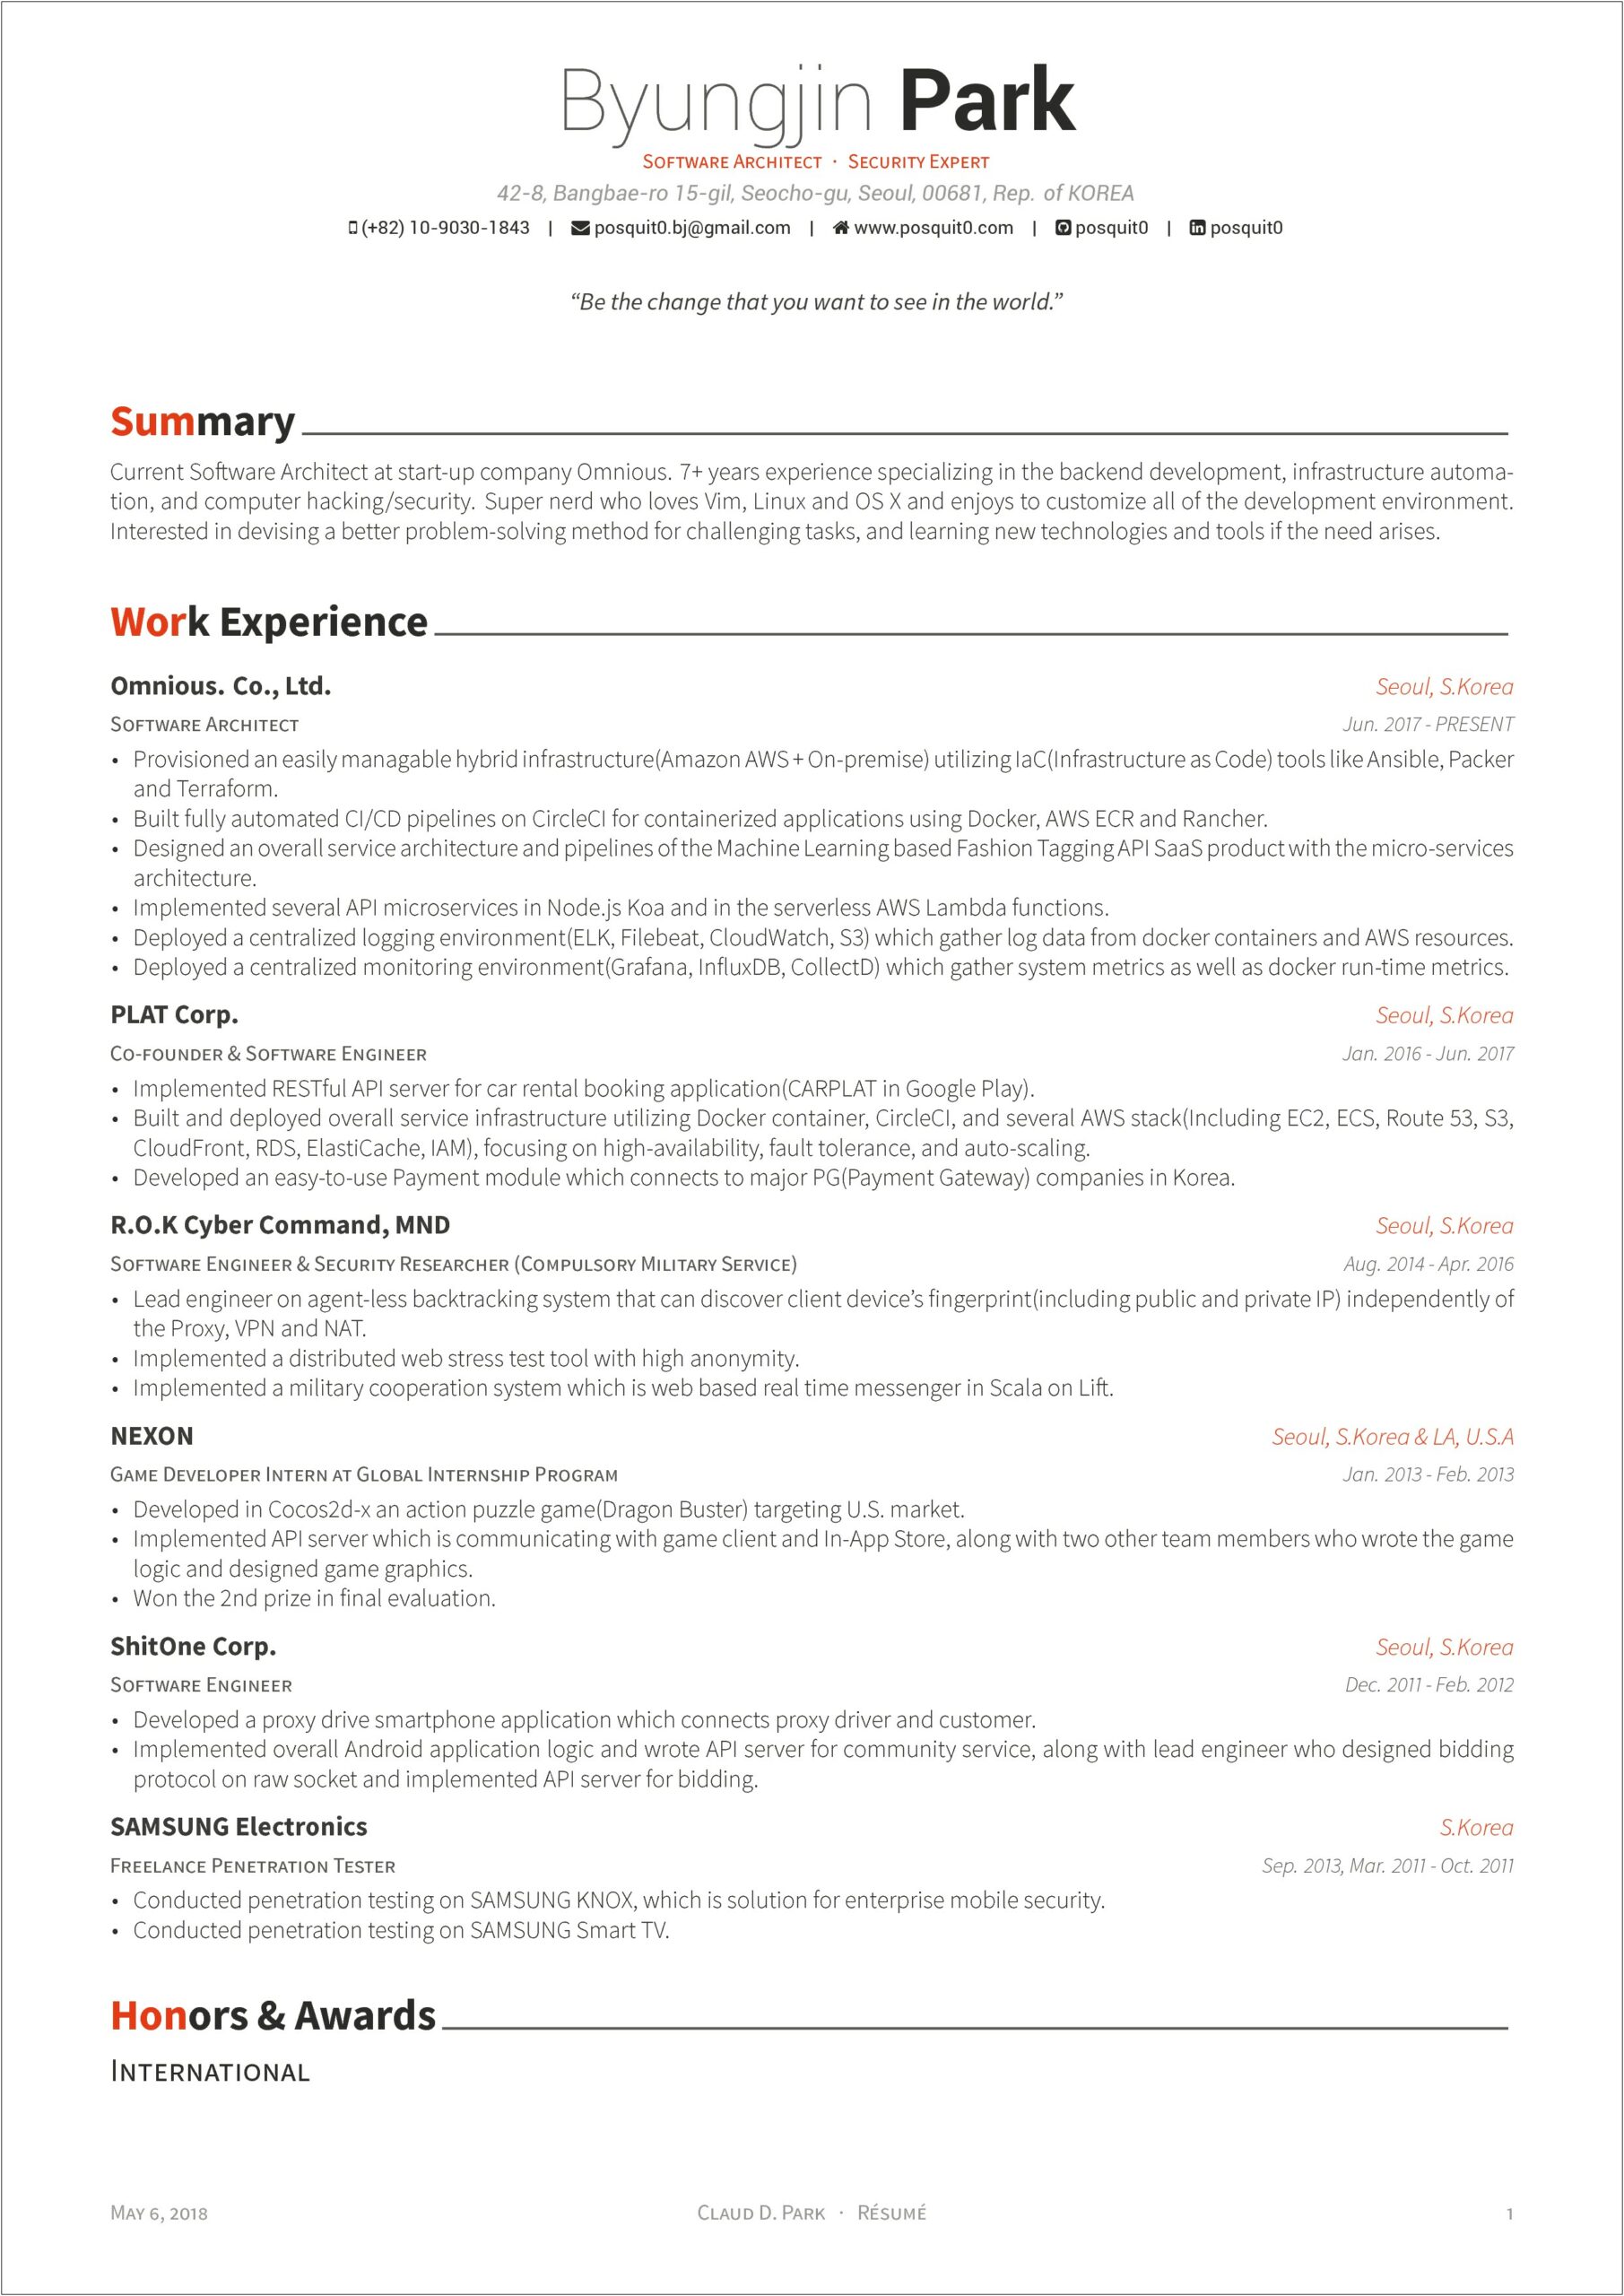 Best Micrissoft Theme To Use For A Resume